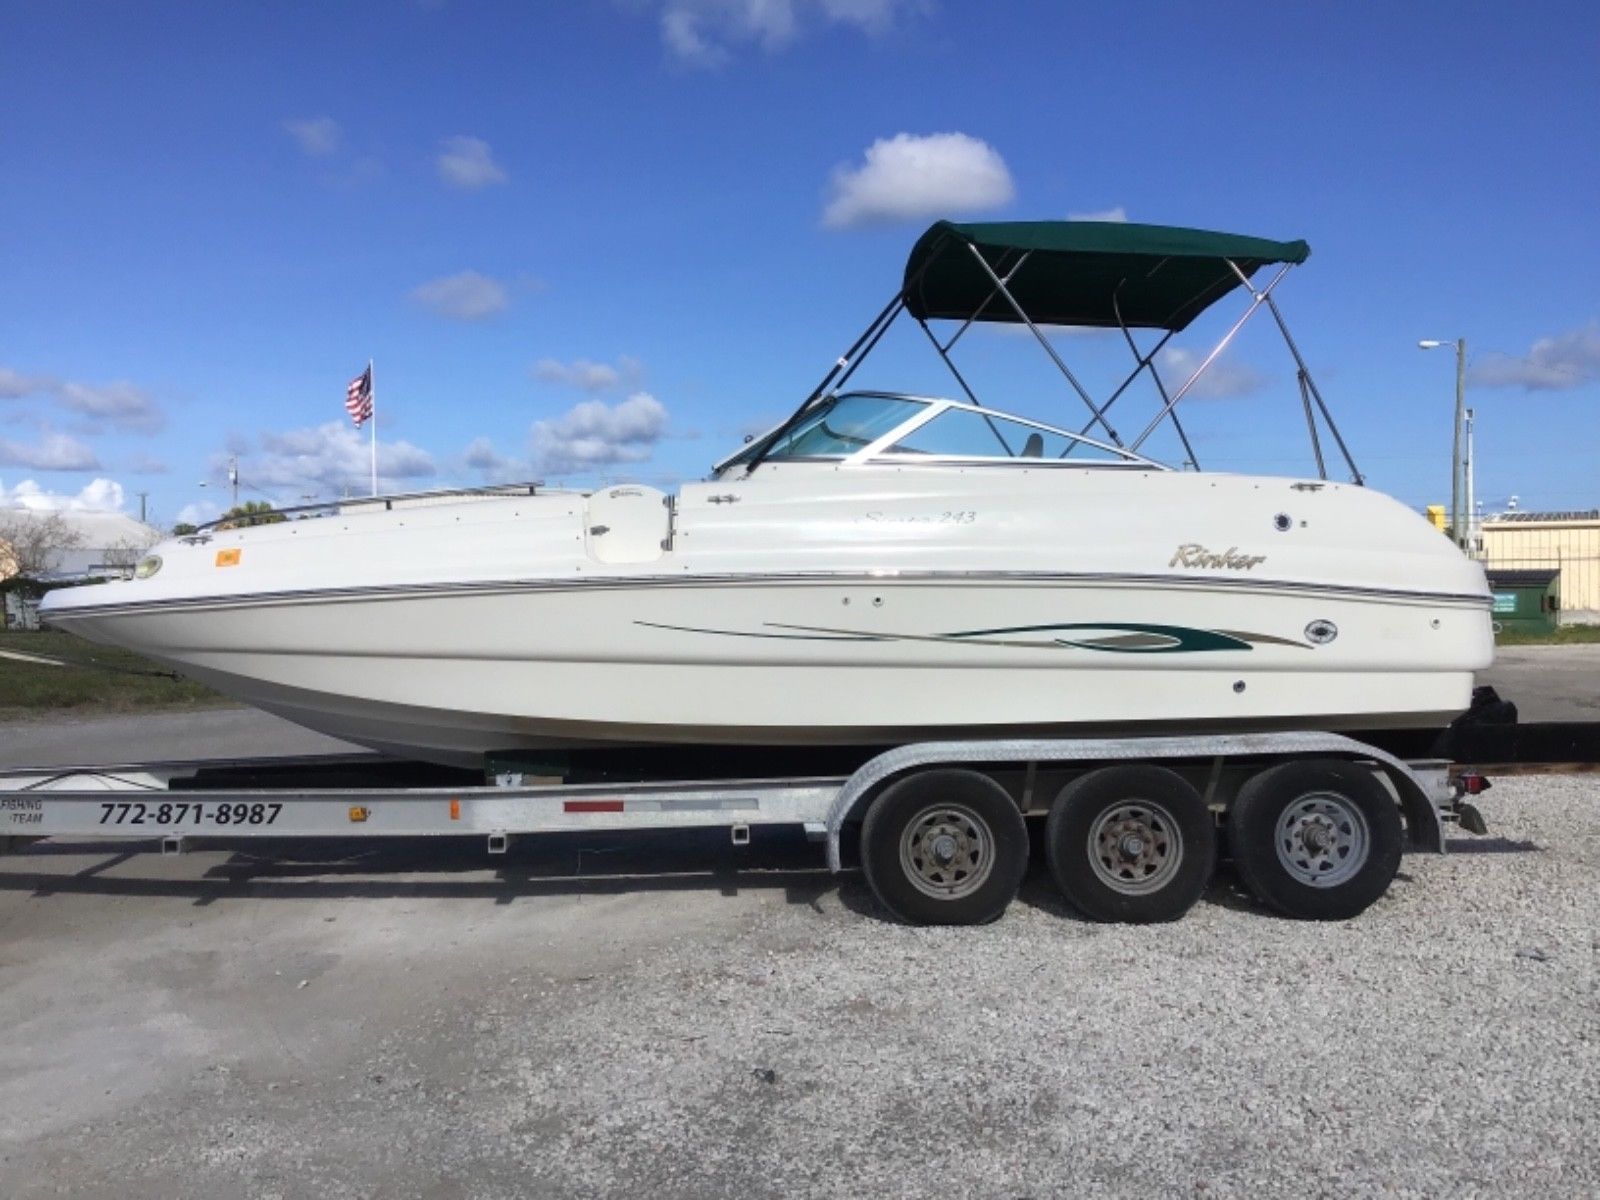 Rinker Siesta 2001 for sale for $11,000 - Boats-from-USA.com